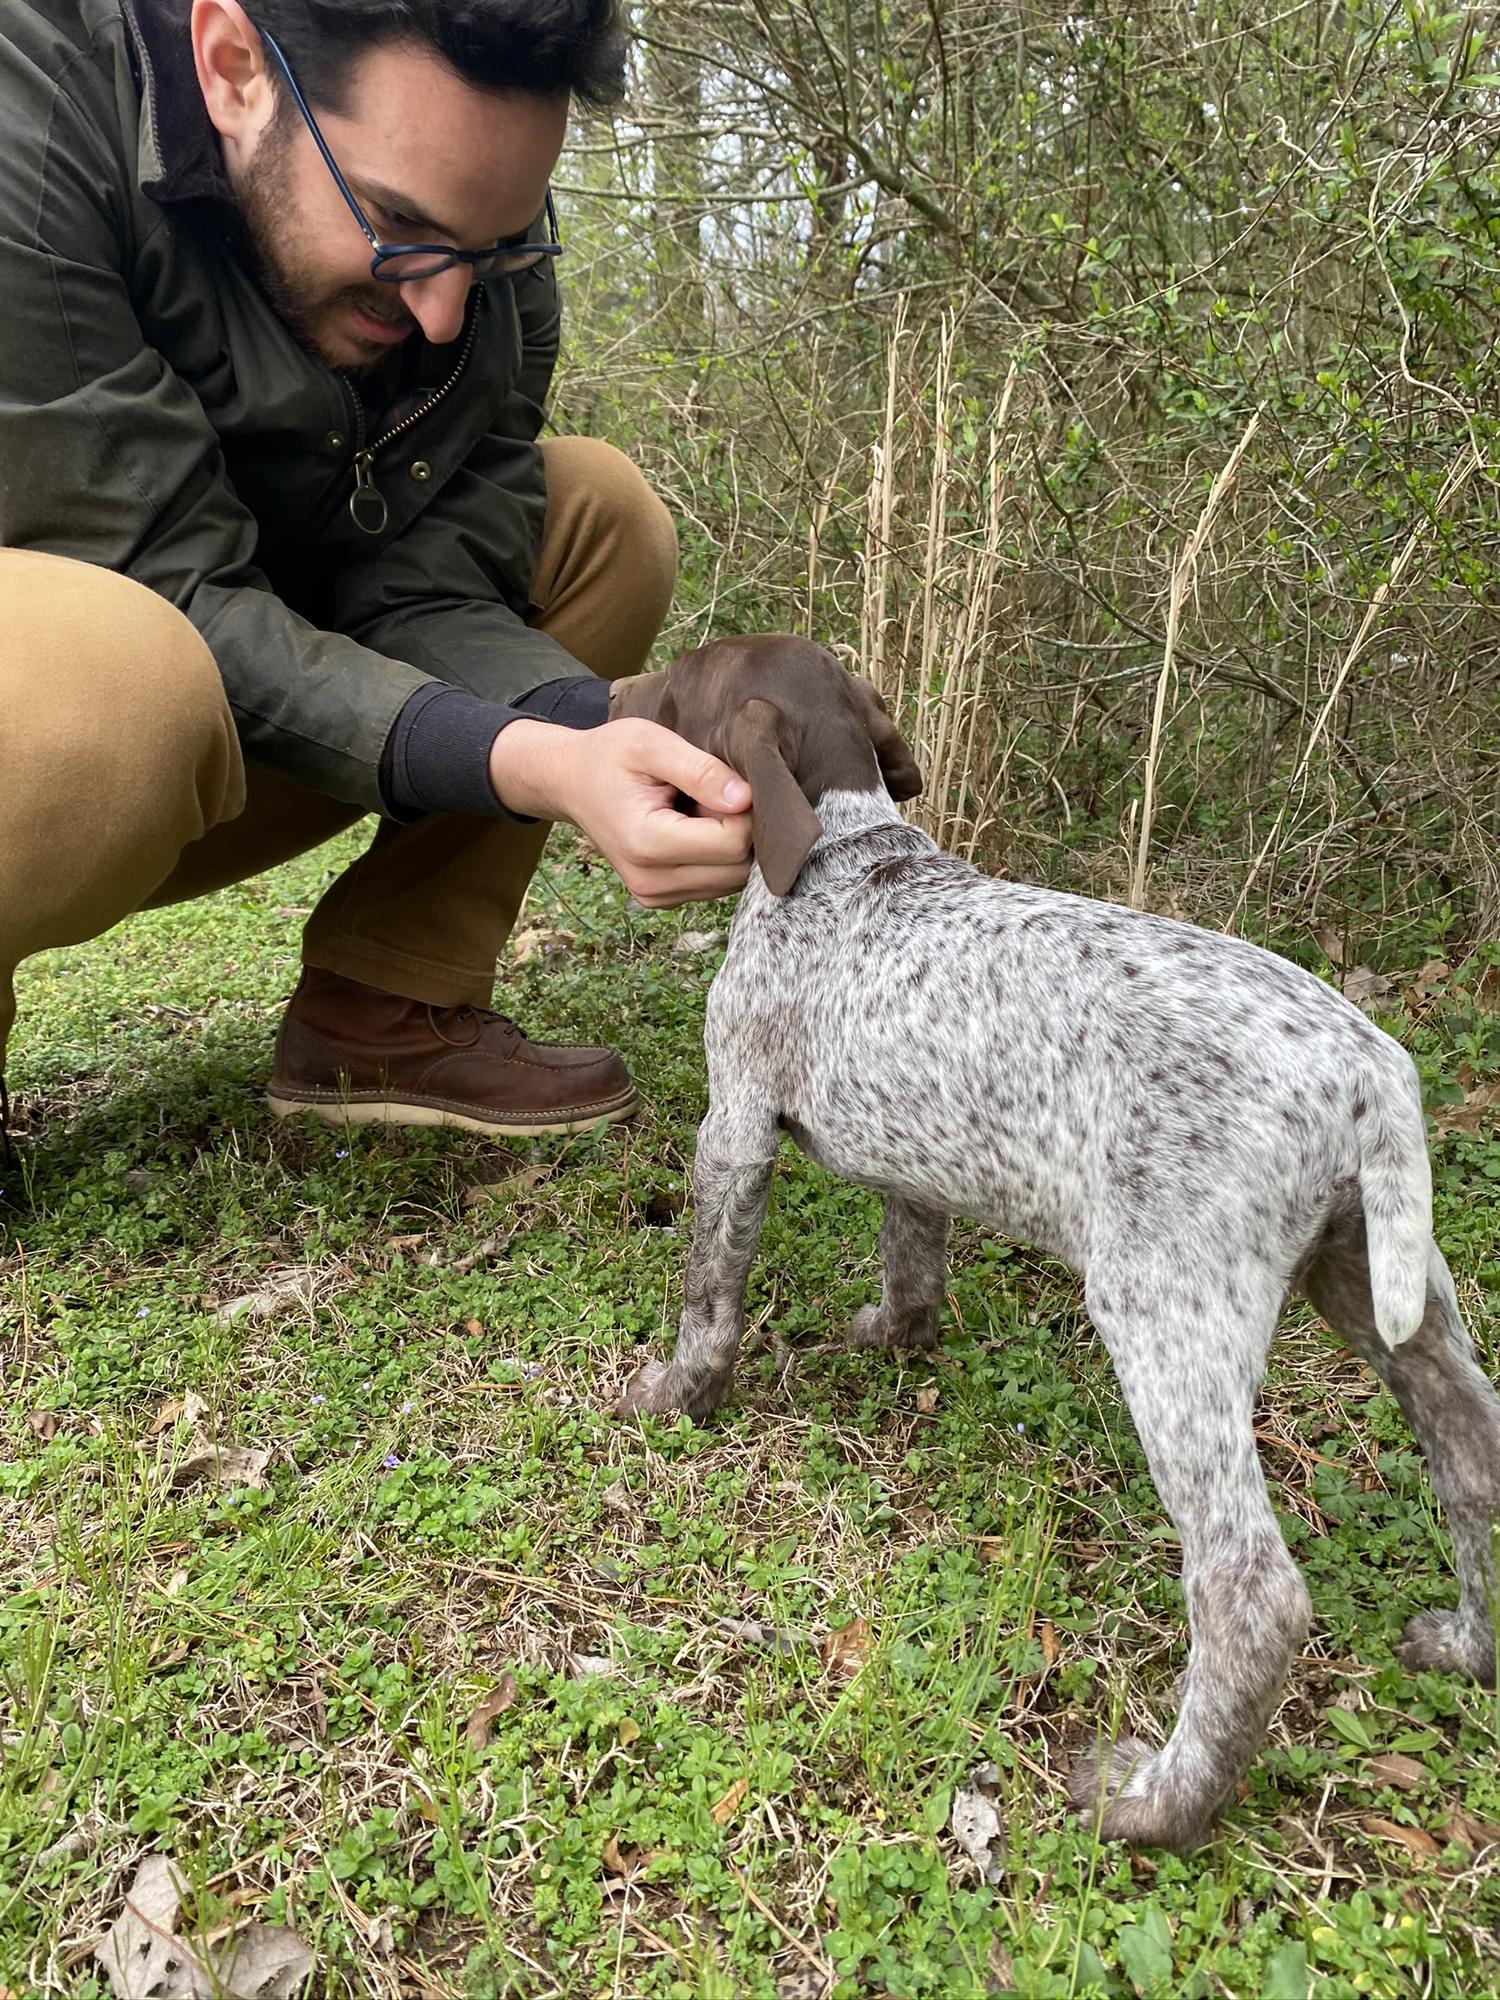 Pulaski, TN. March 2020. Meeting Pepper for the first time!